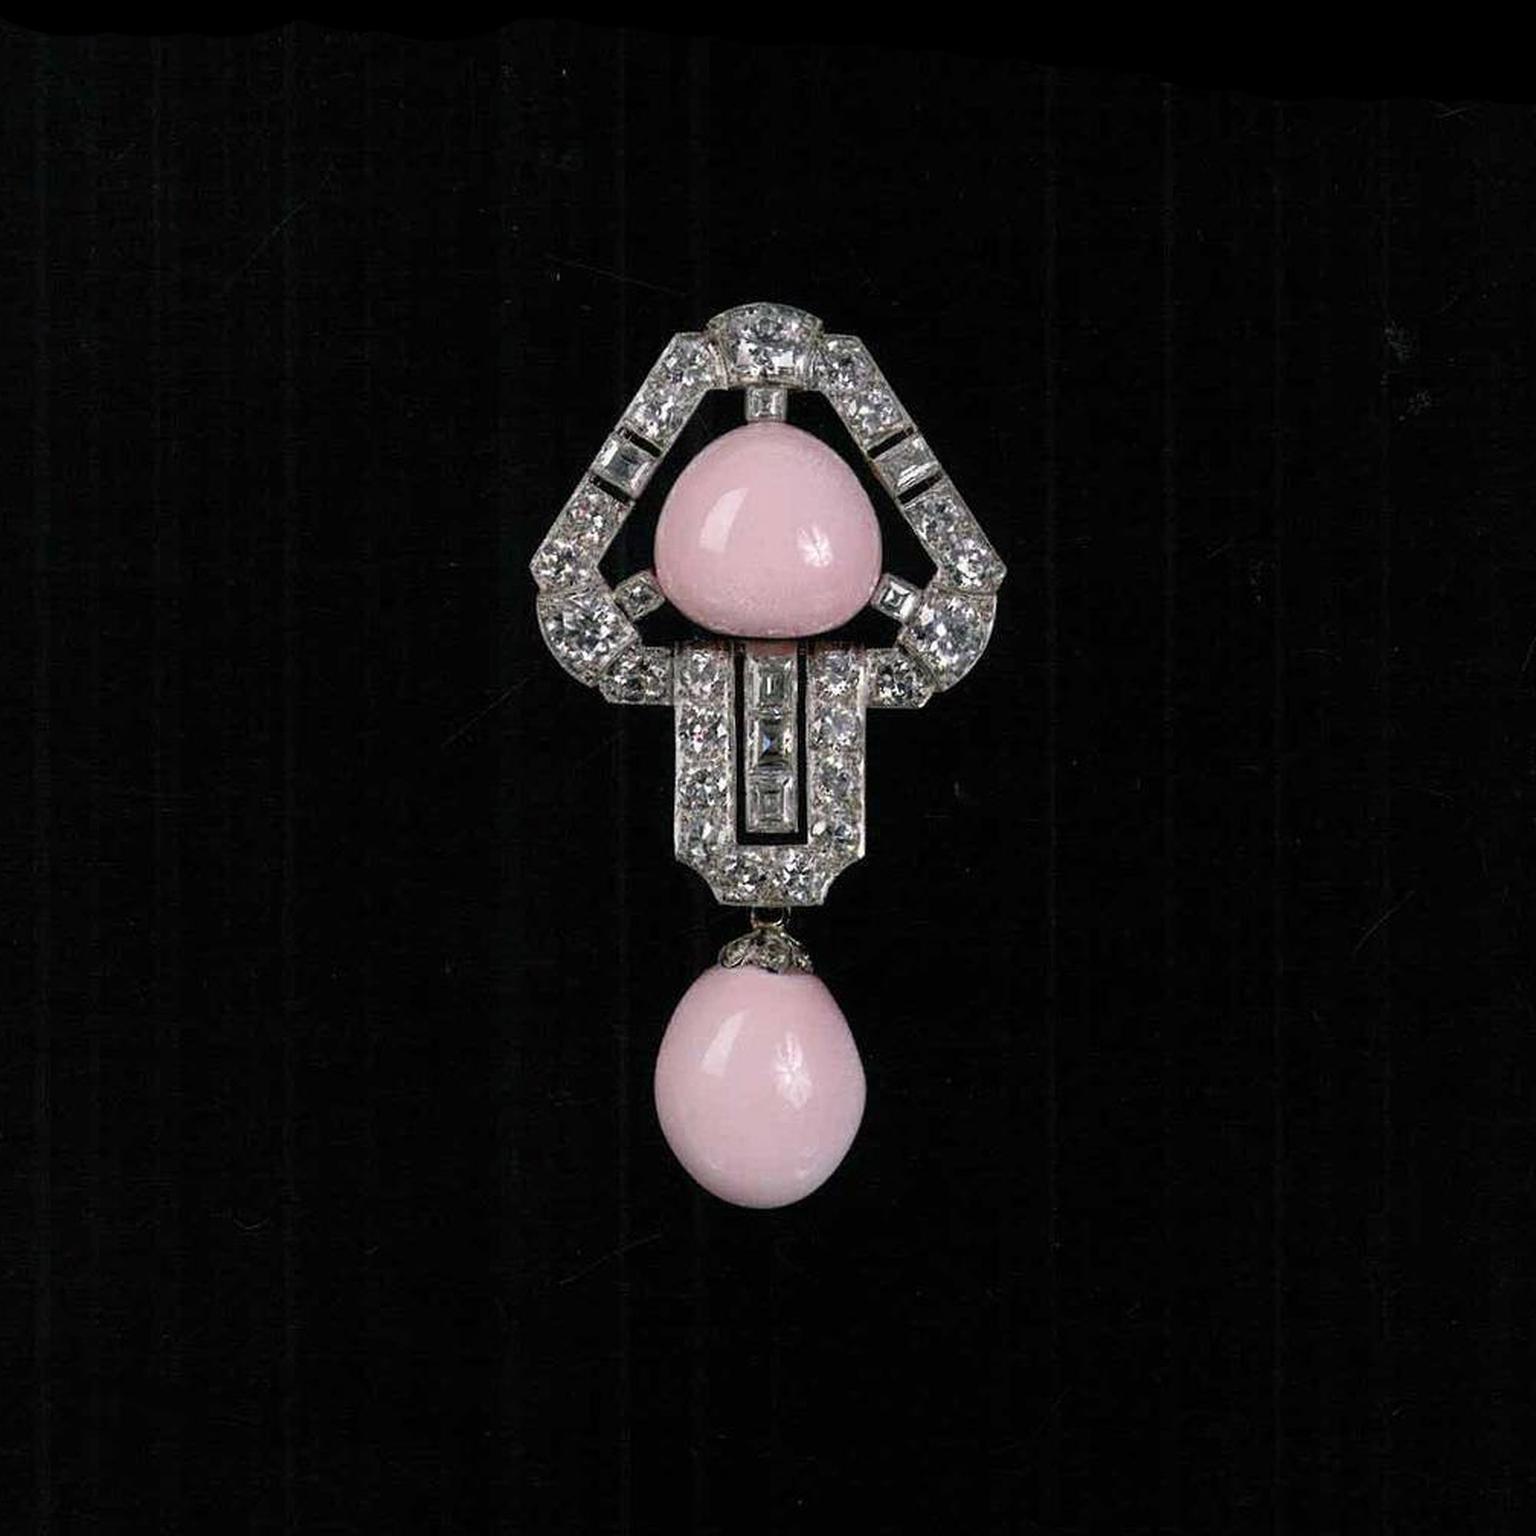 The Queen Mary Conch Pearl brooch